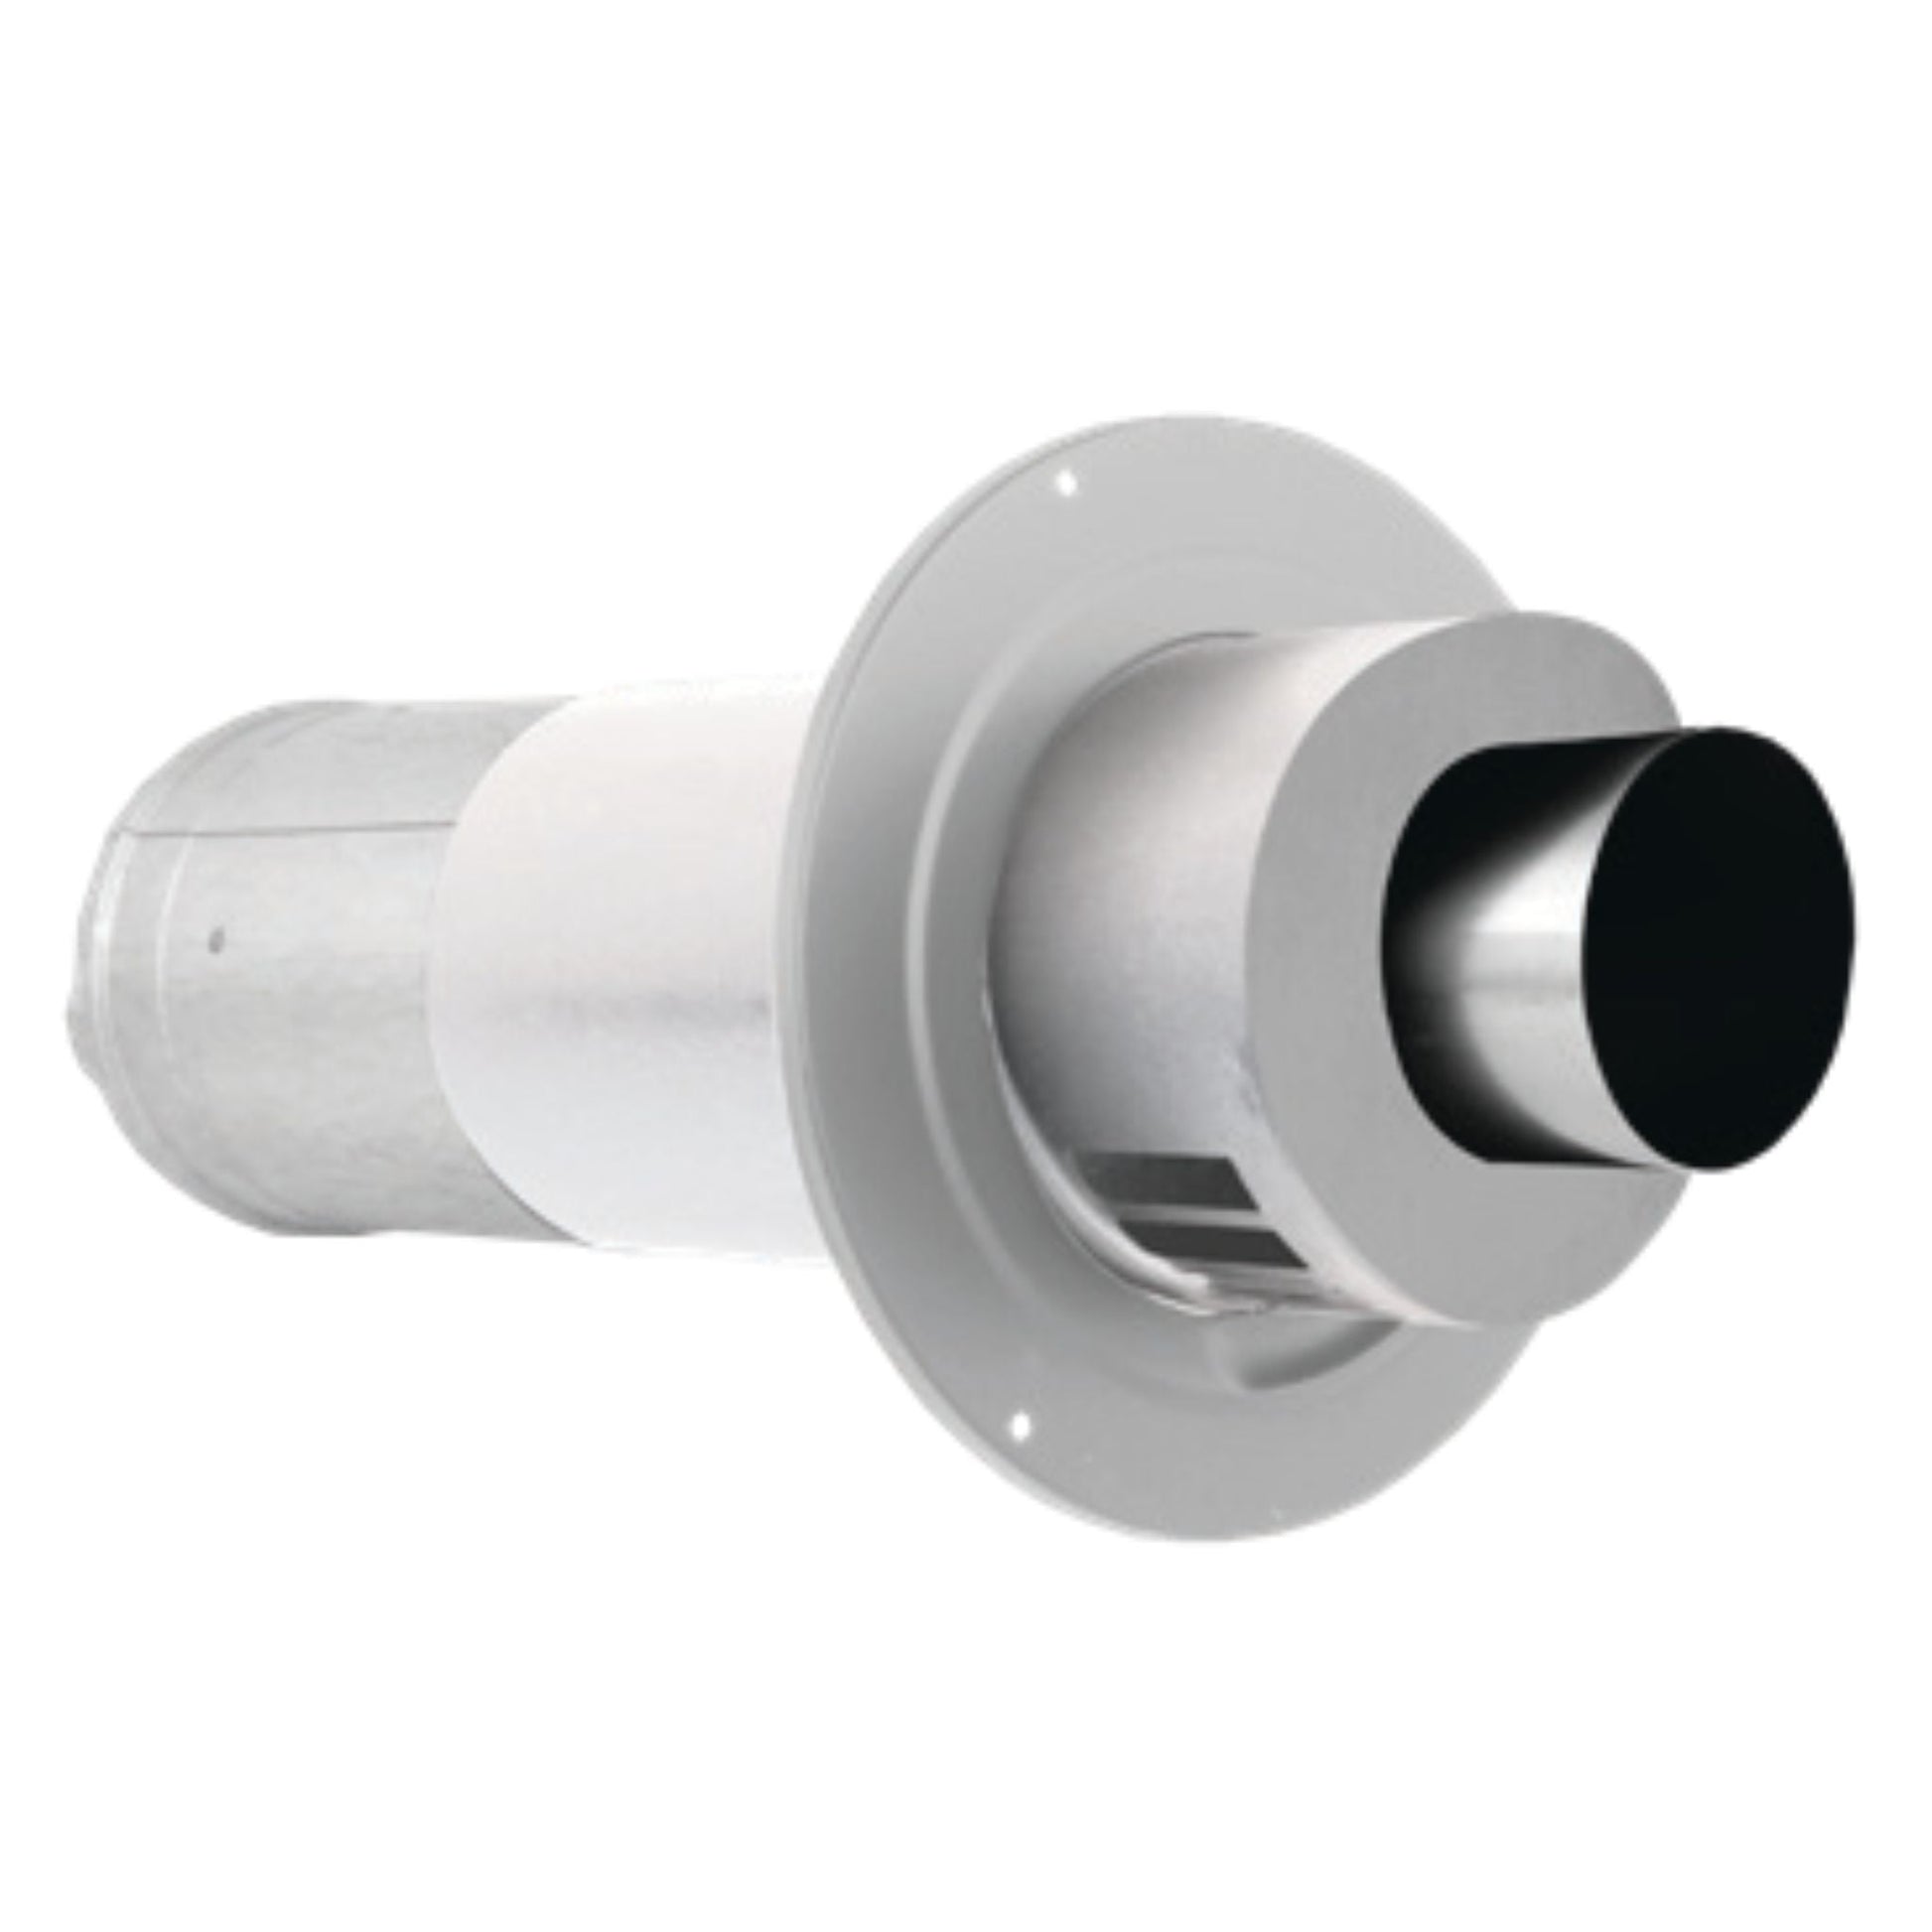 DuraVent Concentric Vent System 3" x 5" Horizontal Termination for Gas Fuel Applications